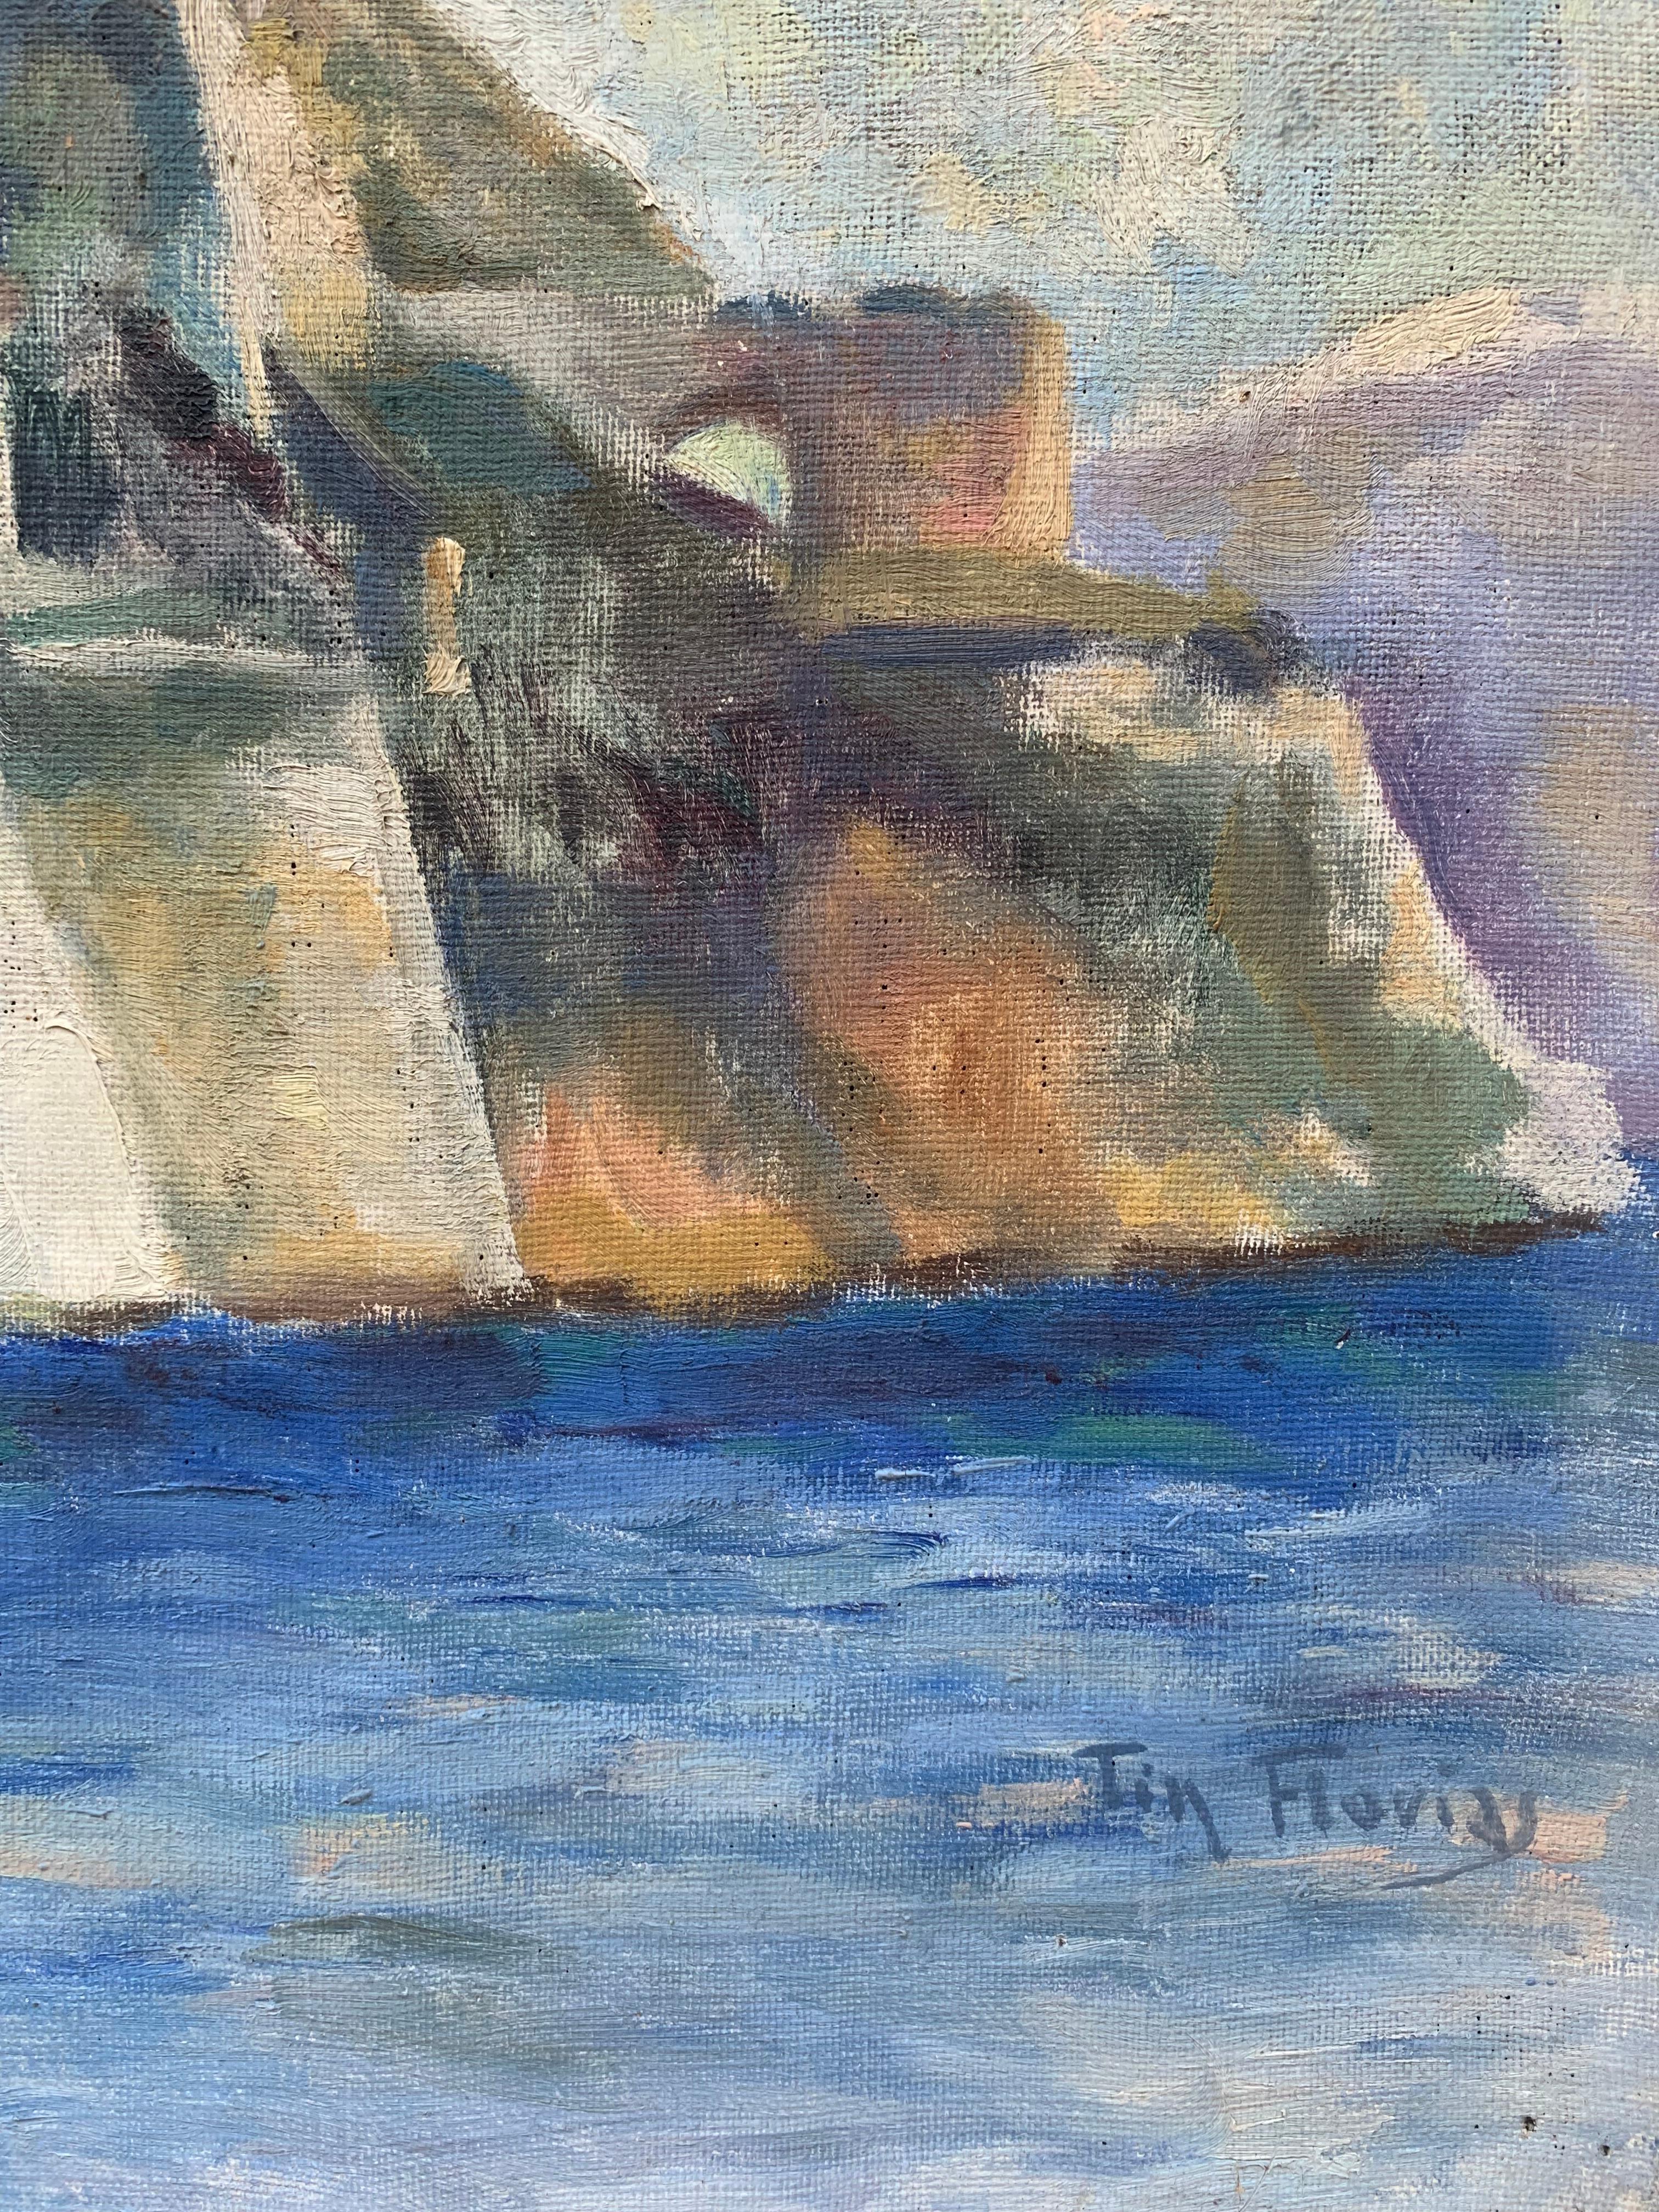 Venetian Fortress On The Greek Island Of Corfu. Signed Tin Florias  - Realist Painting by Constantin (Tin) Florias